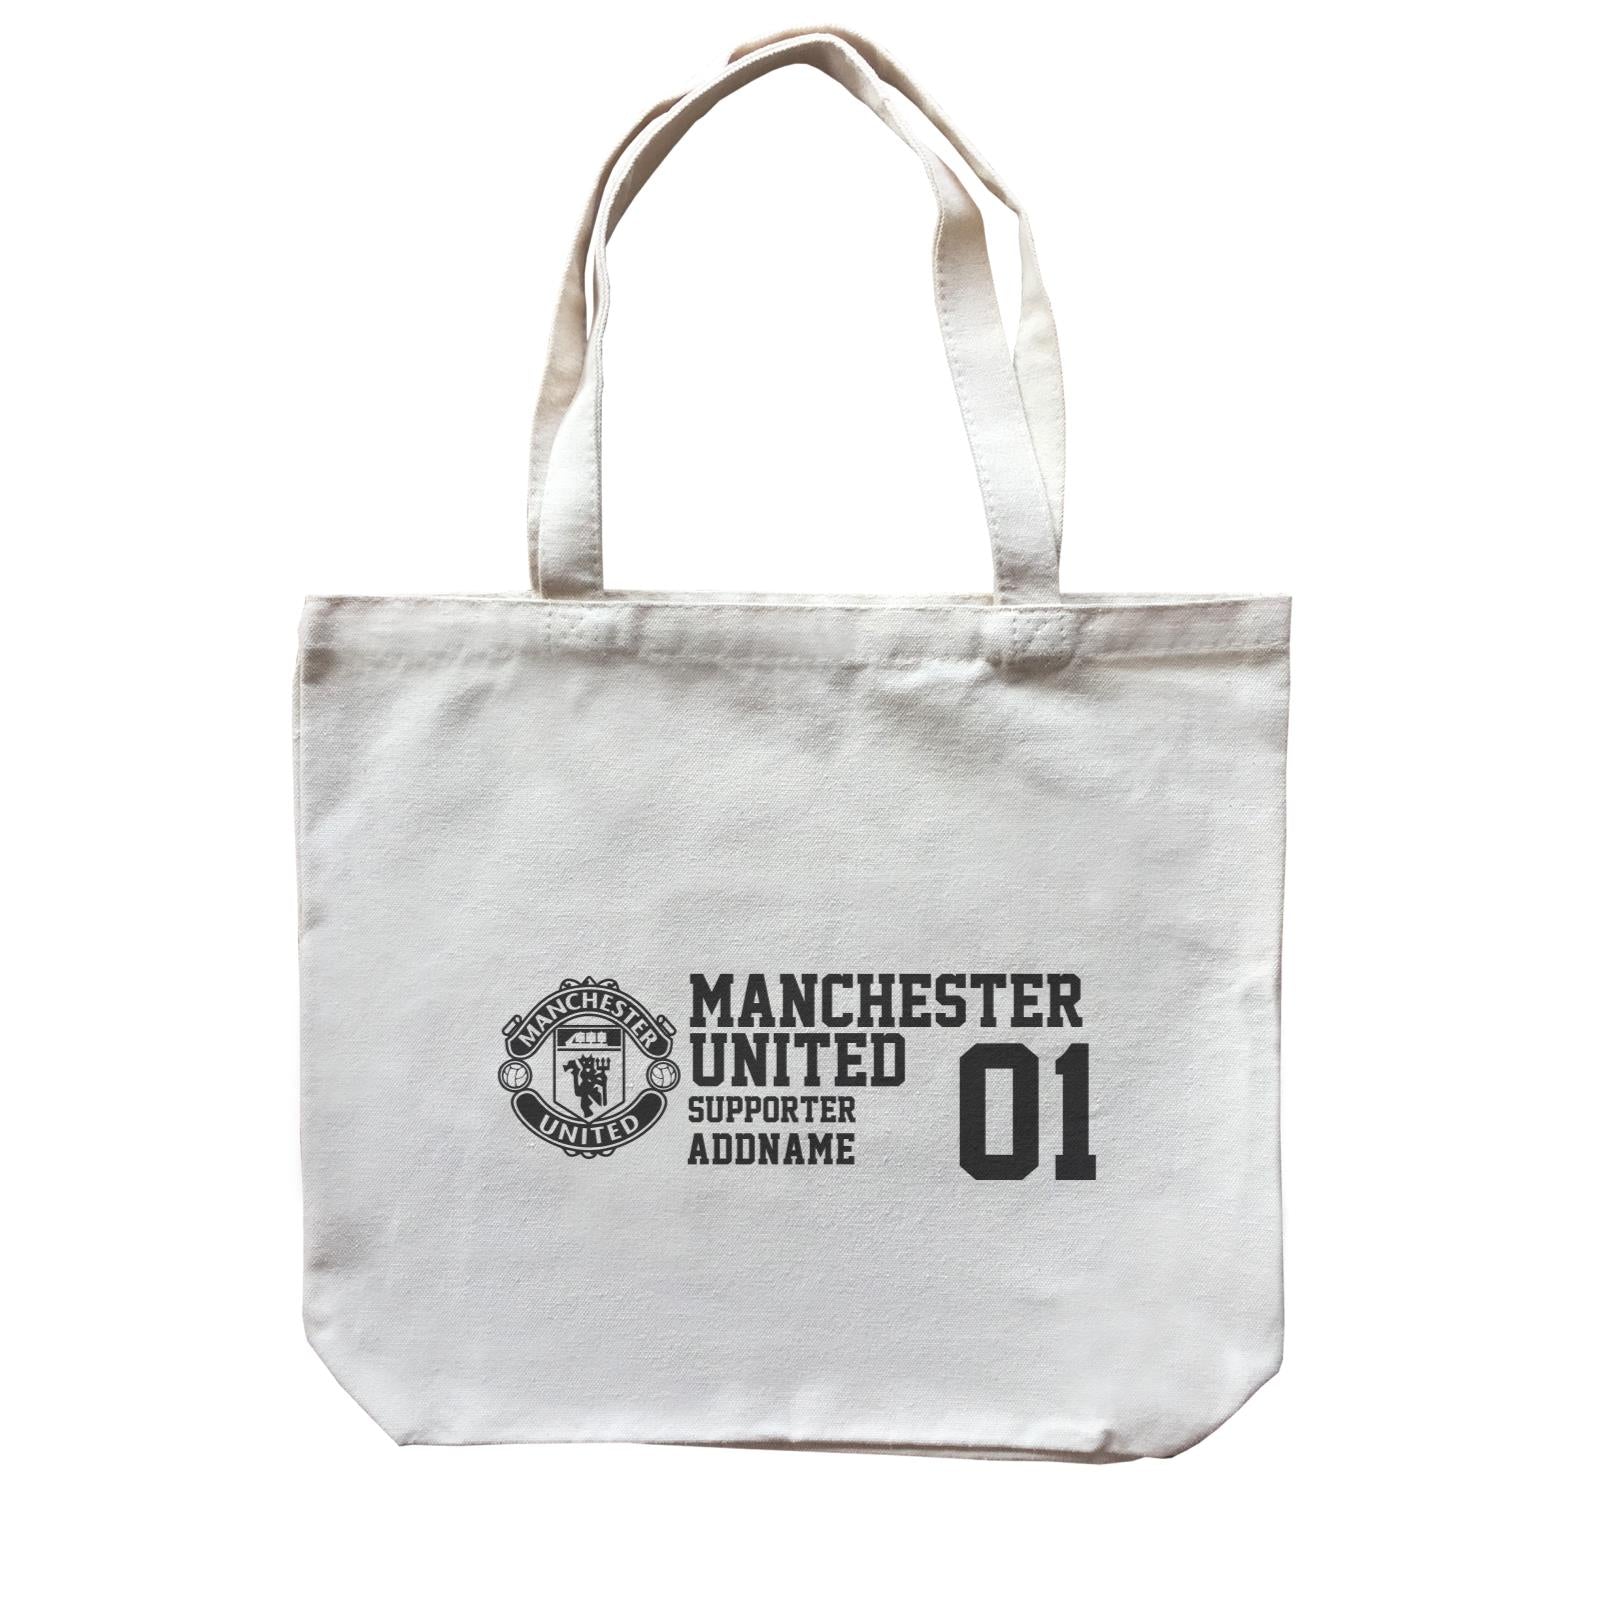 Manchester United Football Supporter Accessories Addname Canvas Bag